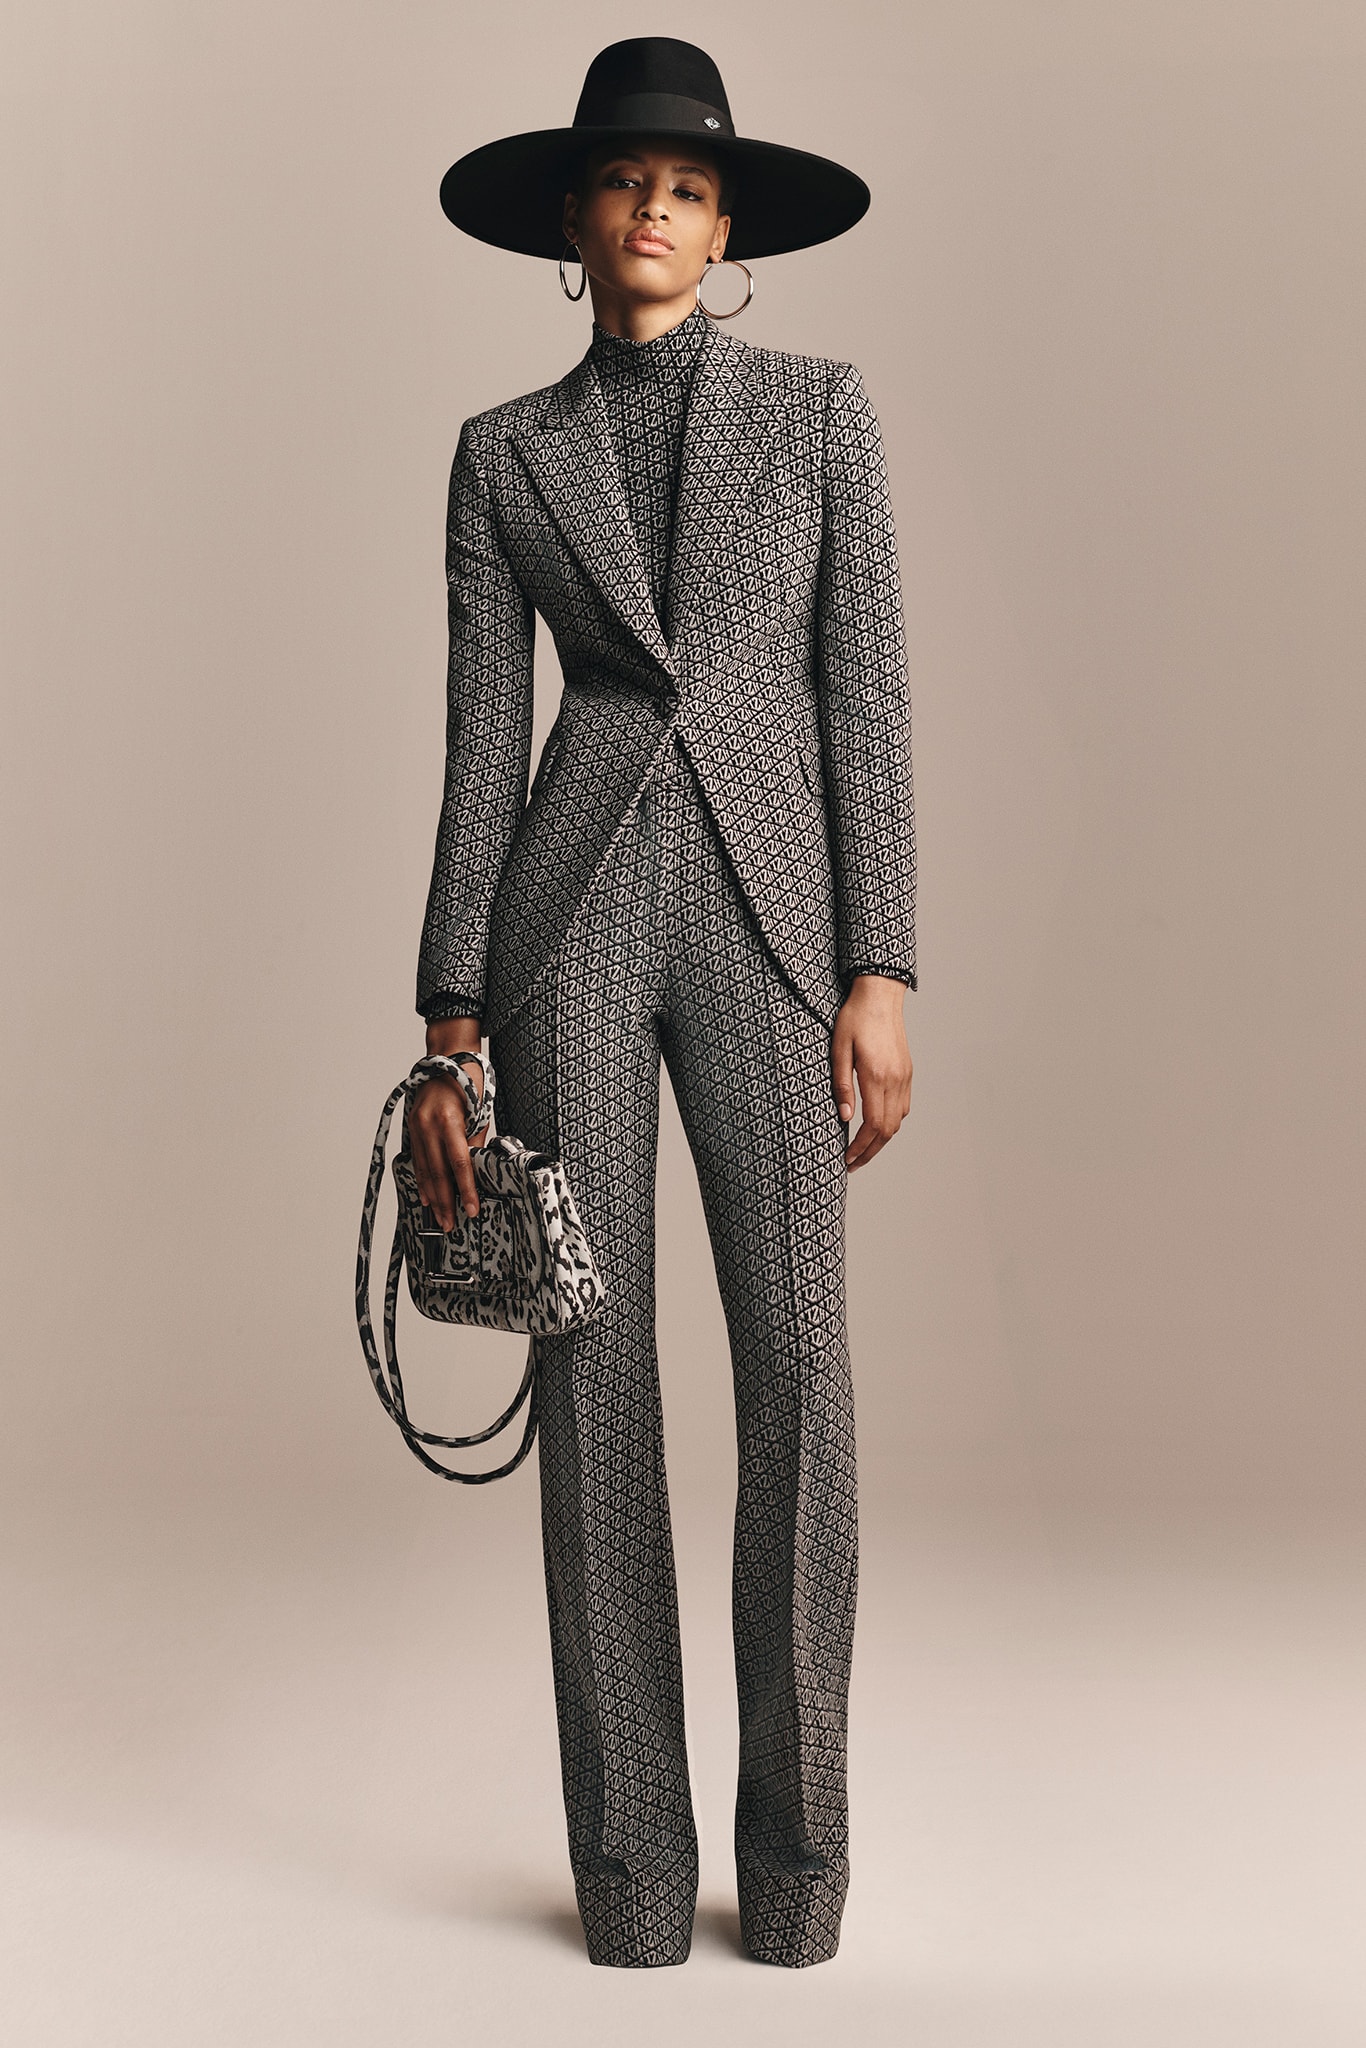 TommyXZendaya Fall Winter 2019 Collection Lookbook Suit Grey